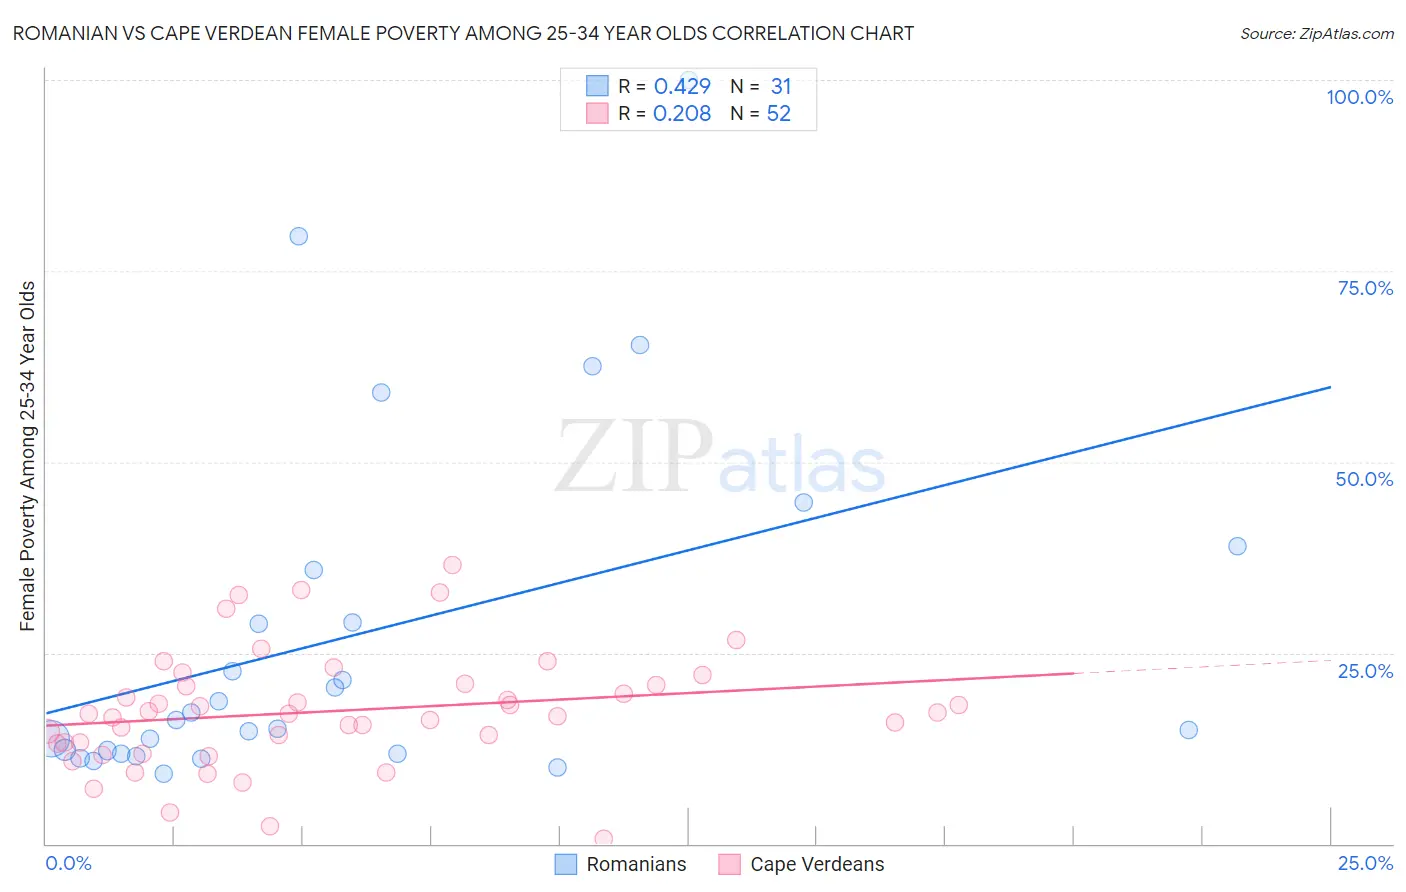 Romanian vs Cape Verdean Female Poverty Among 25-34 Year Olds